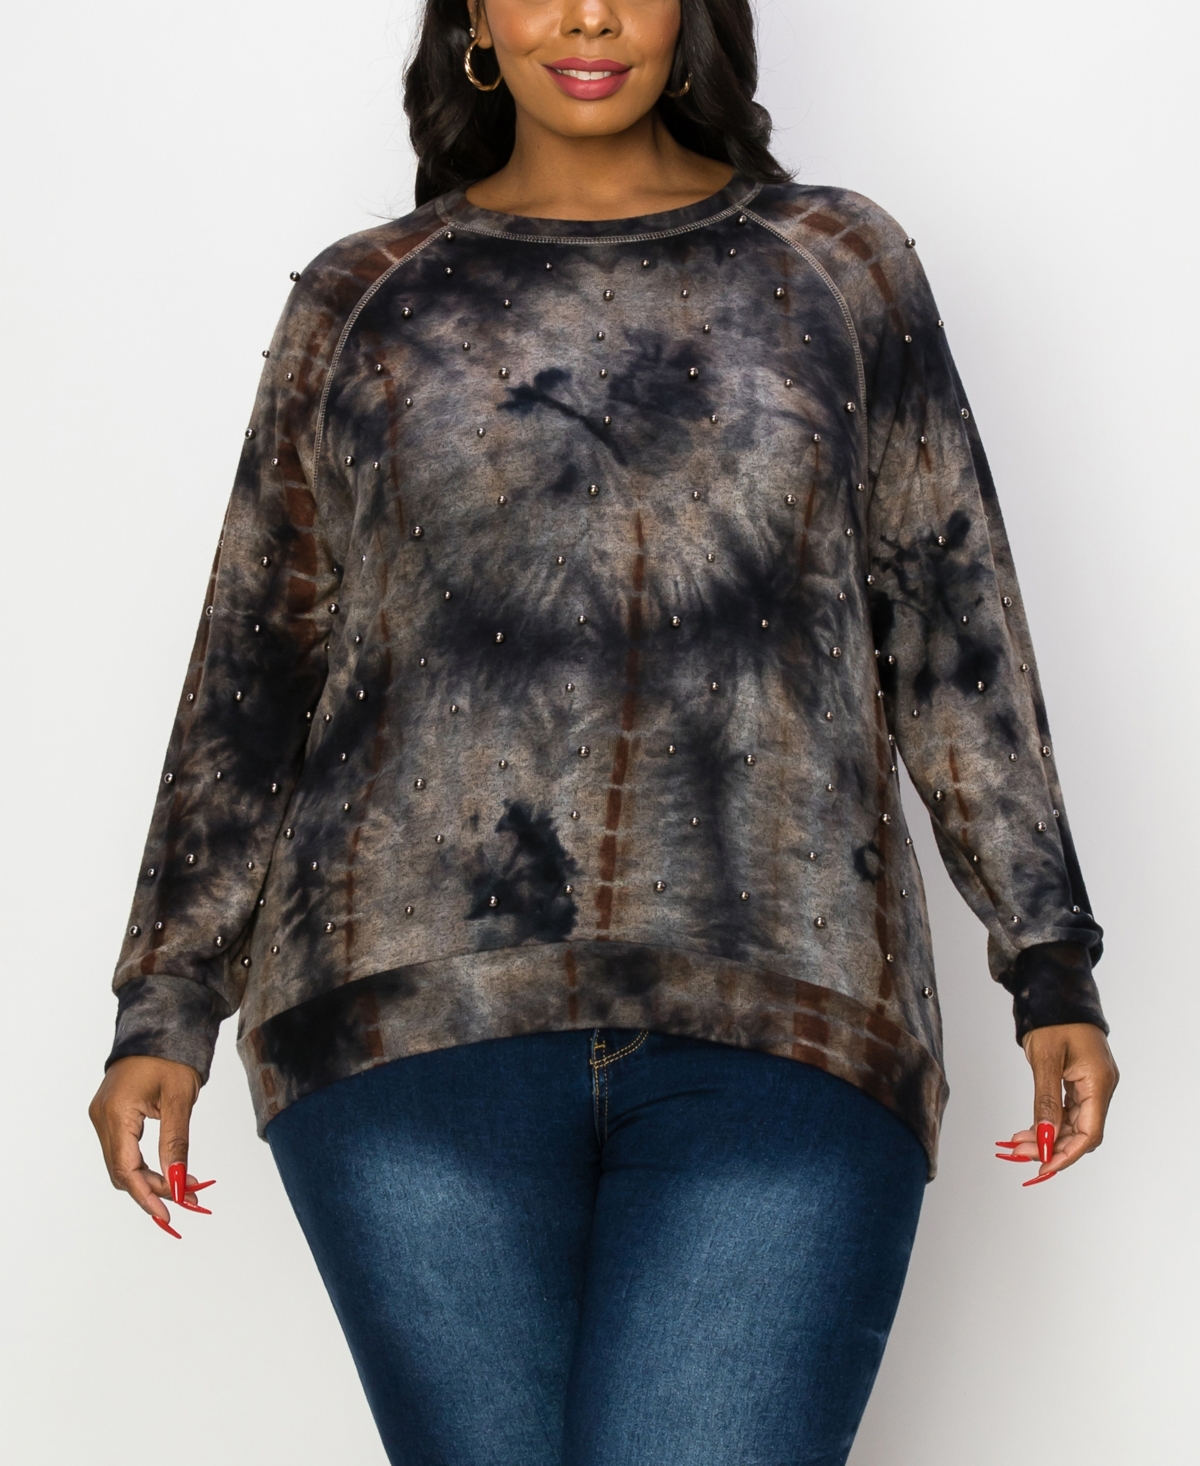 Coin 1804 Plus Size Cozy Long Sleeve Pullover Top With Gunmetal Studs In Navy Brown